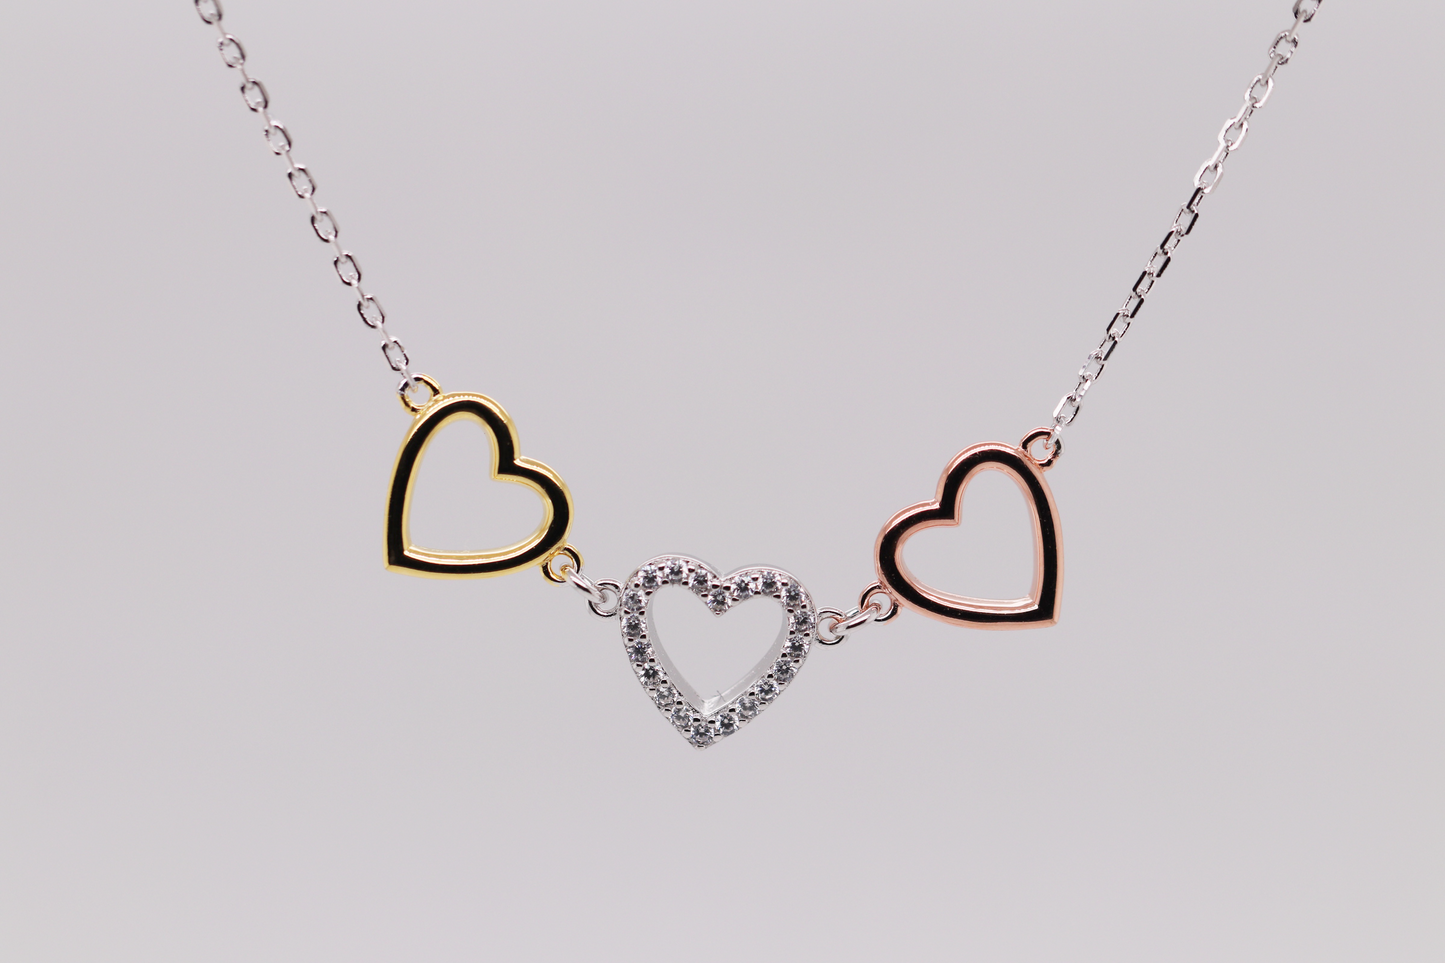 3 Tone Collection - 3 Heart Chain Ref: 3COLP004N